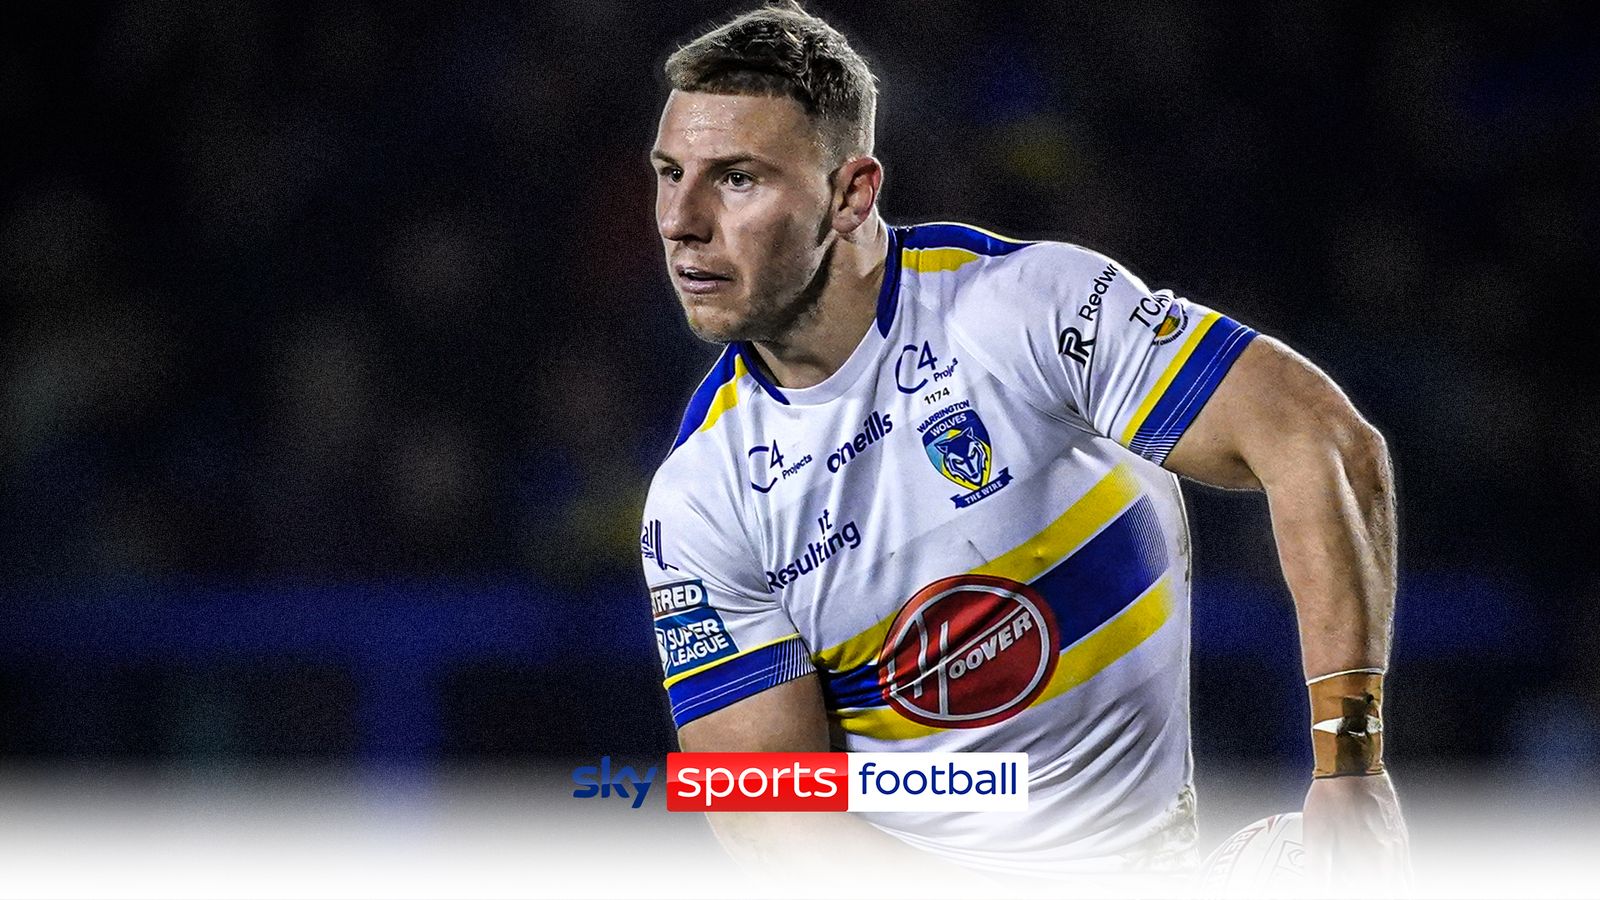 George Williams says he is enjoying Warrington Wolves stay but ‘definitely wouldn’t write off’ NRL return amid Wests Tigers links | Rugby League News